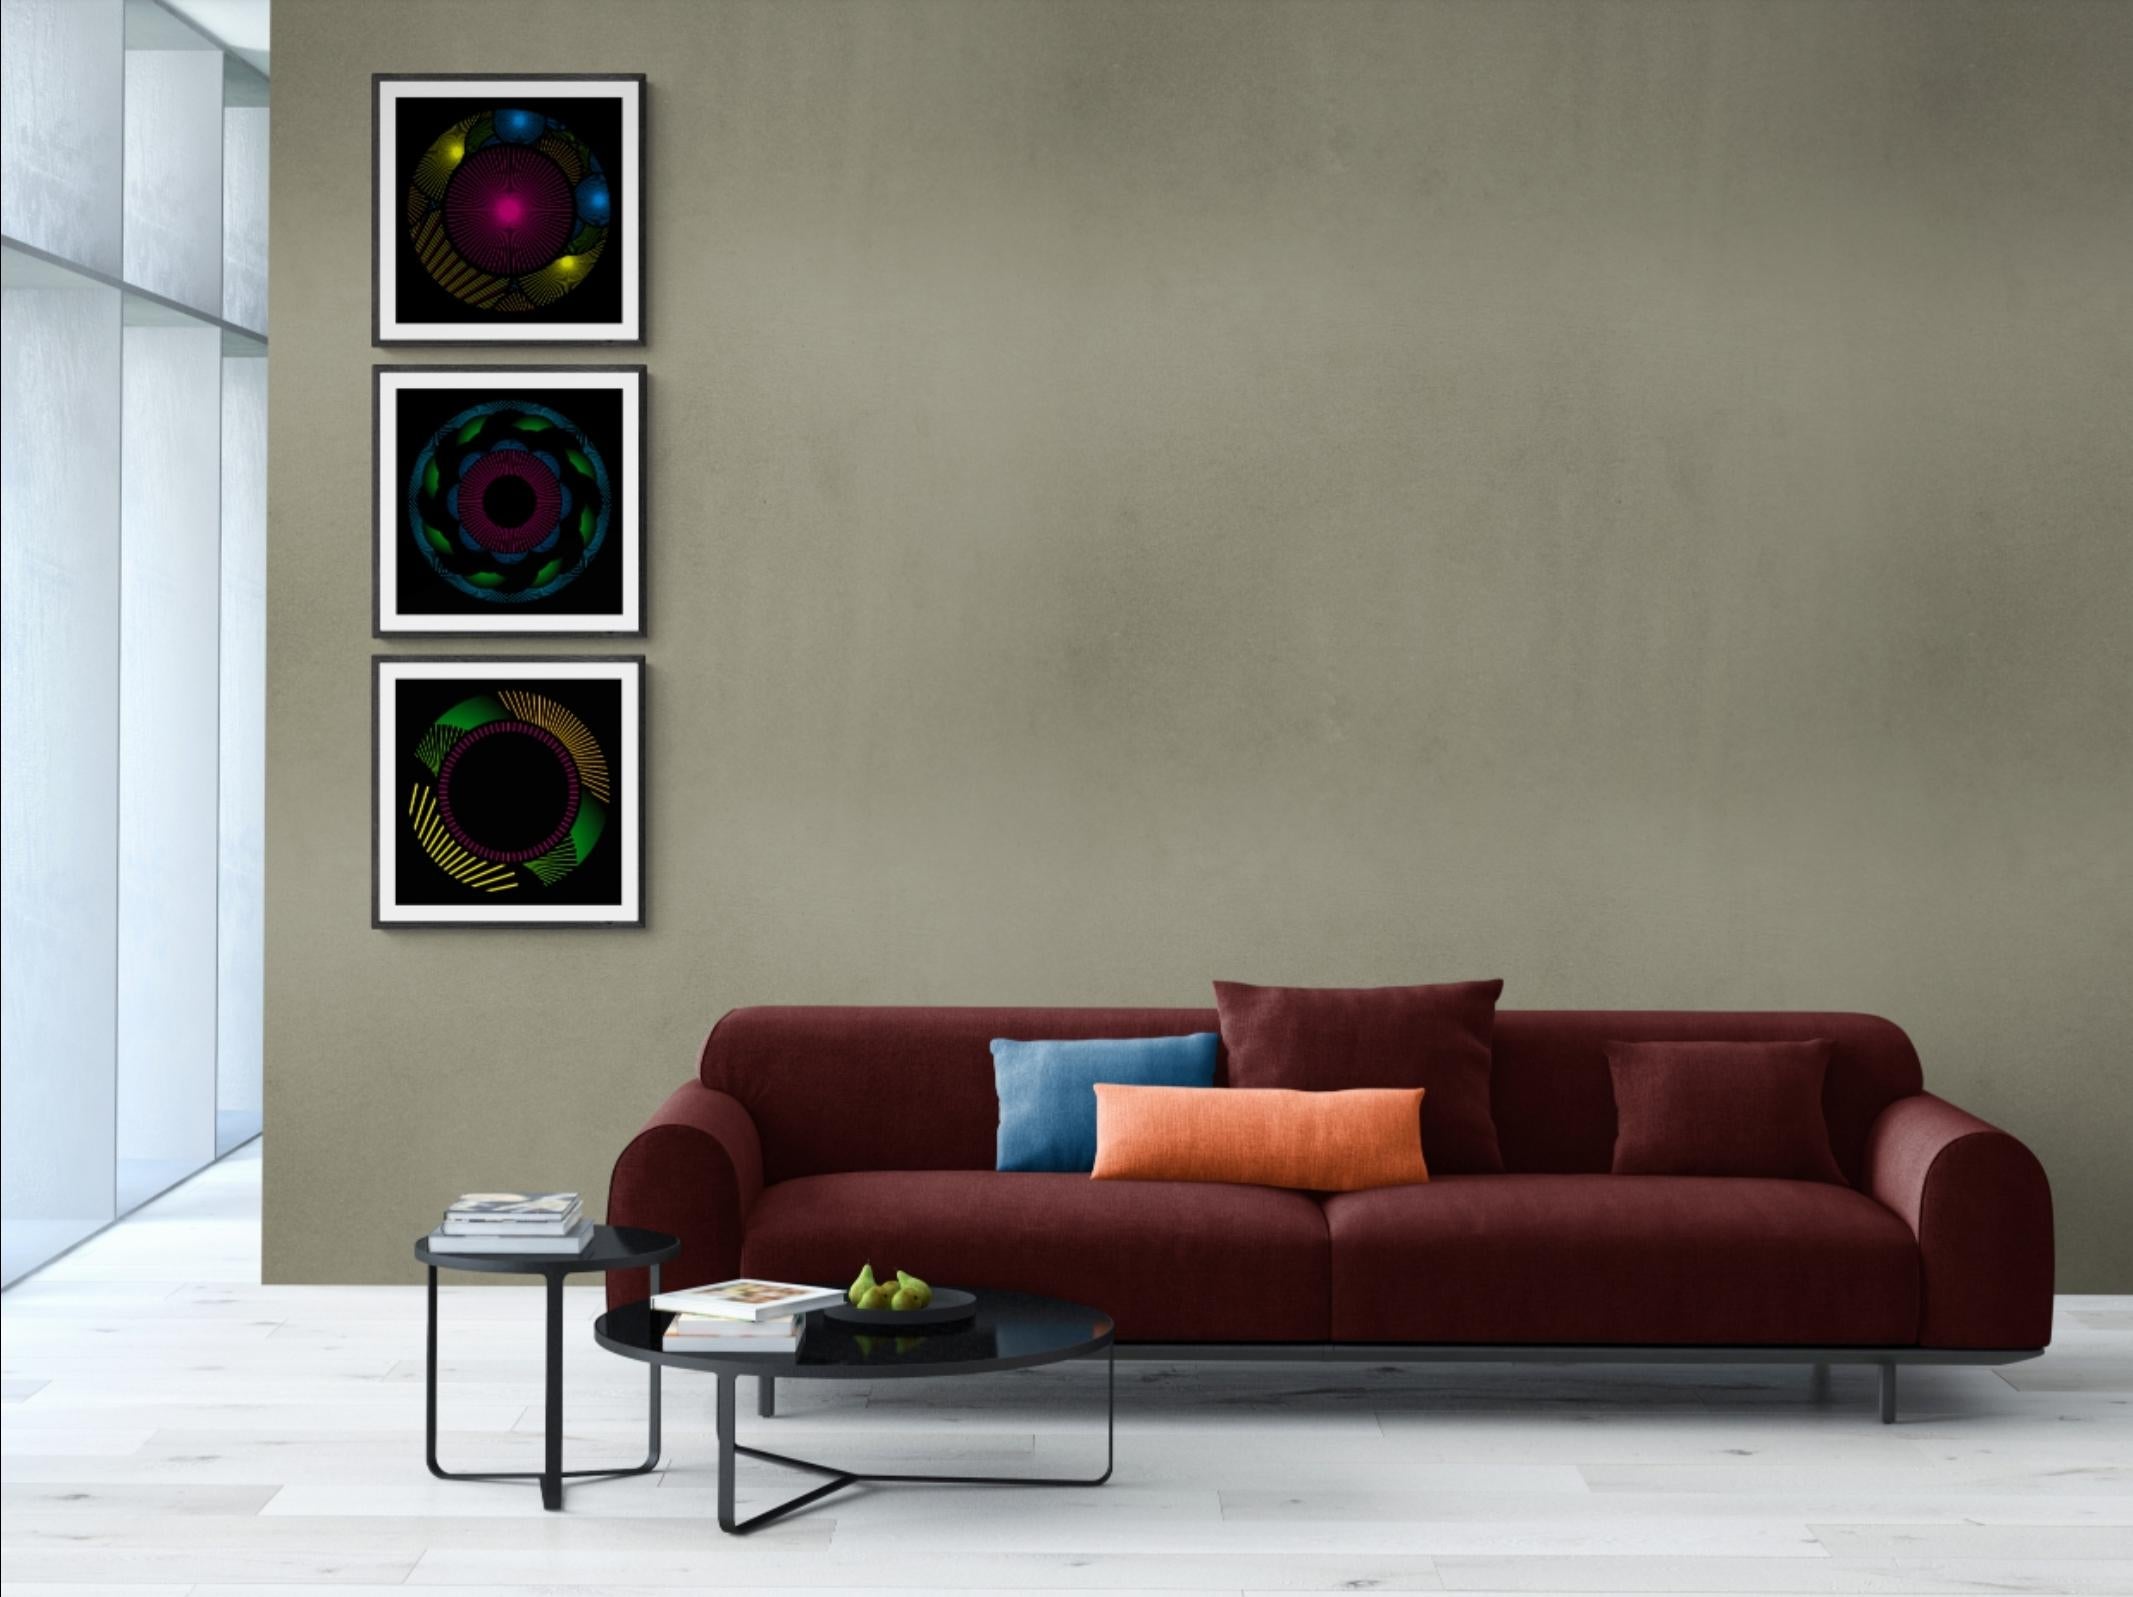 Nebulosa 23 - Abstract Geometric Print by Julio Campos